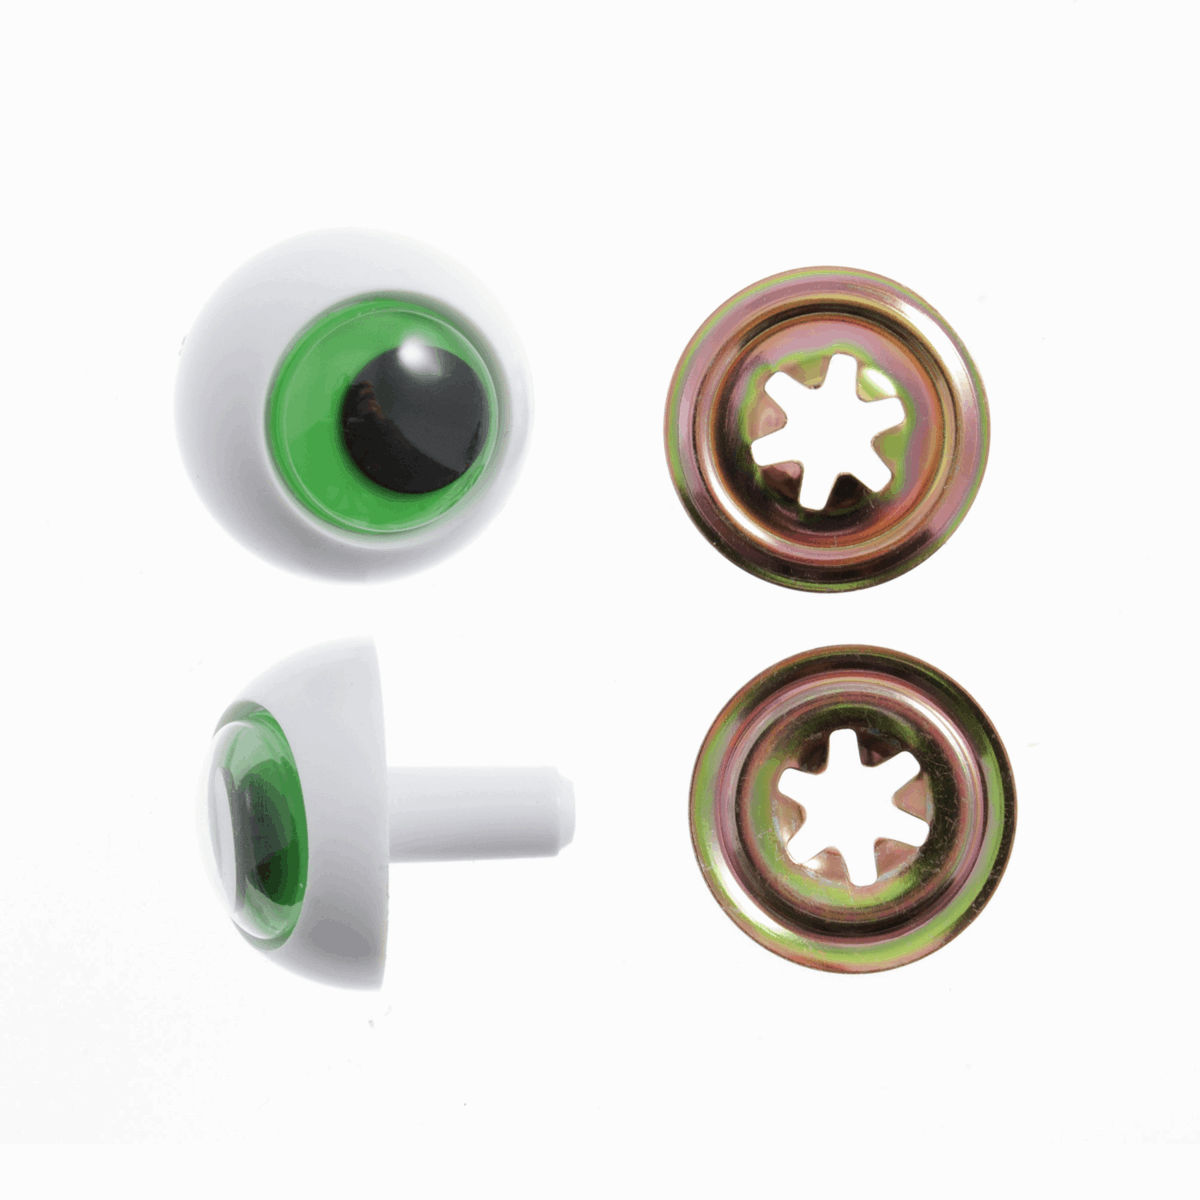 Trimits Toy Eyes - Frogs 24mm (Pack of 2)